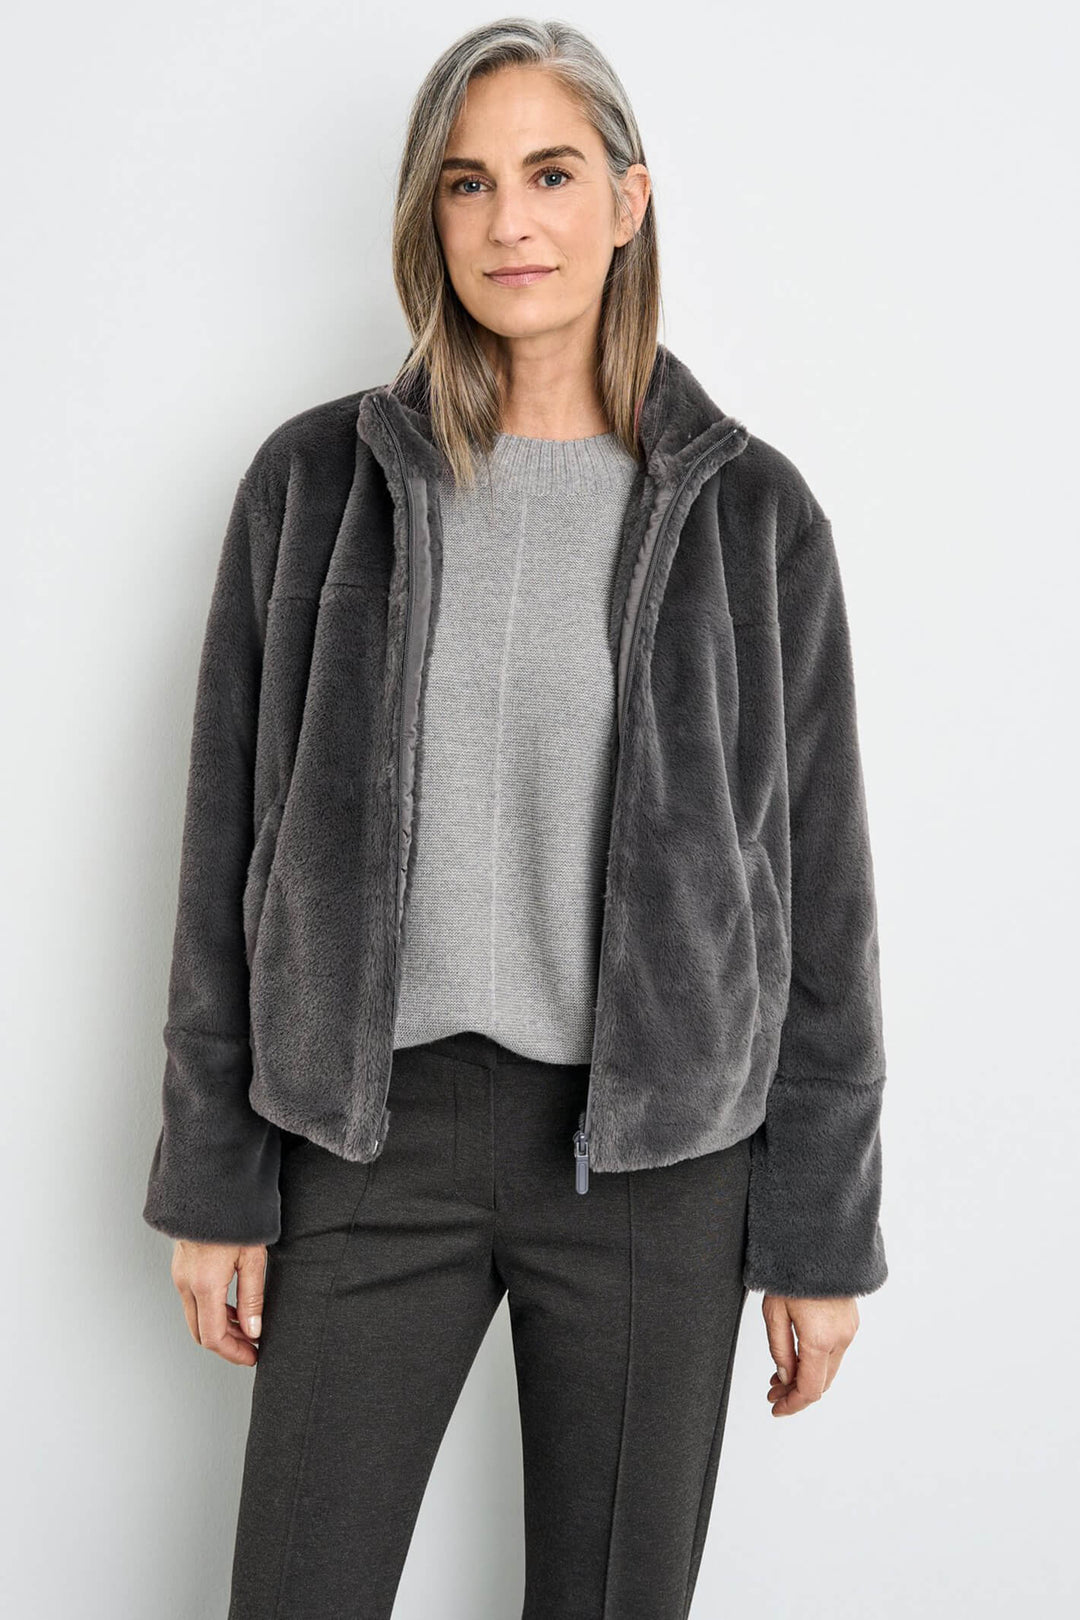 Gerry Weber 230035 Graphite Grey Teddy Zip Front Jacket - Experience Boutique